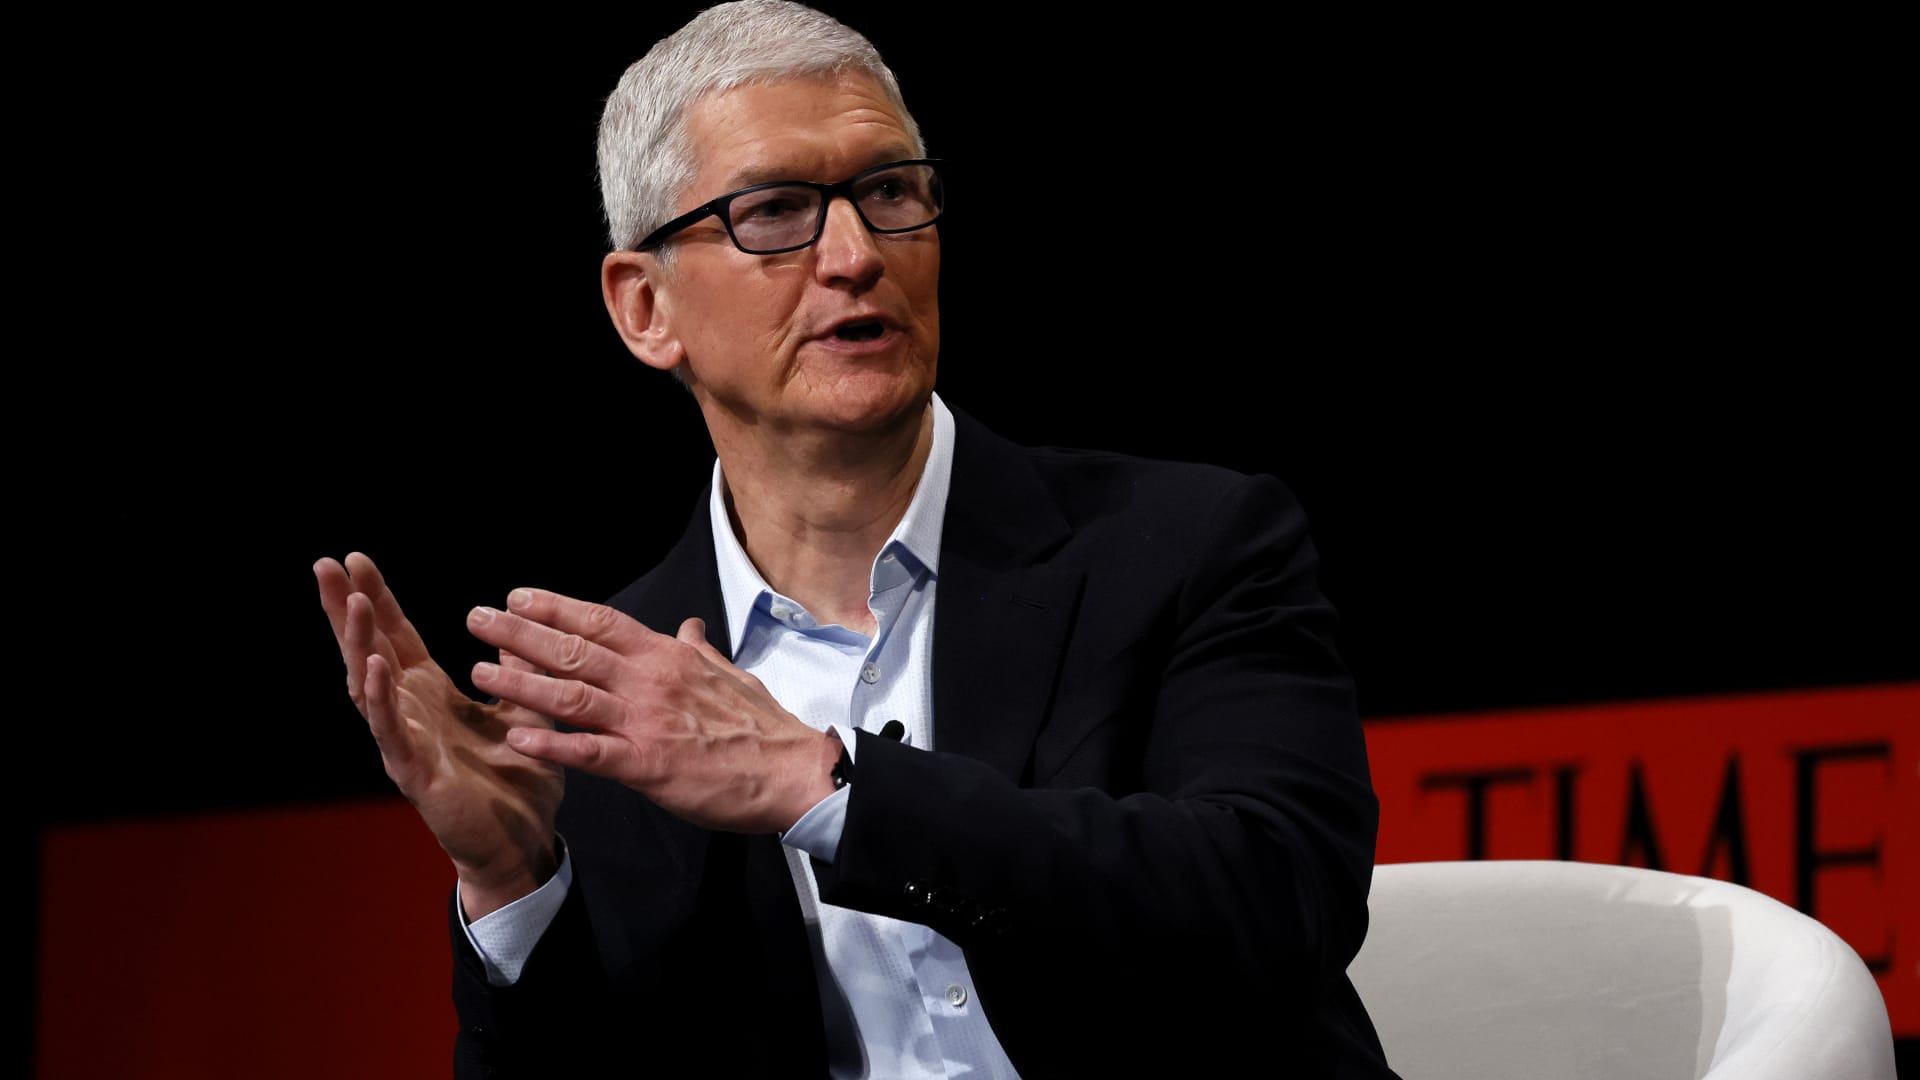 Apple CEO Tim Cook pushes for privacy legislation 'as soon as possible' after visit to Congress